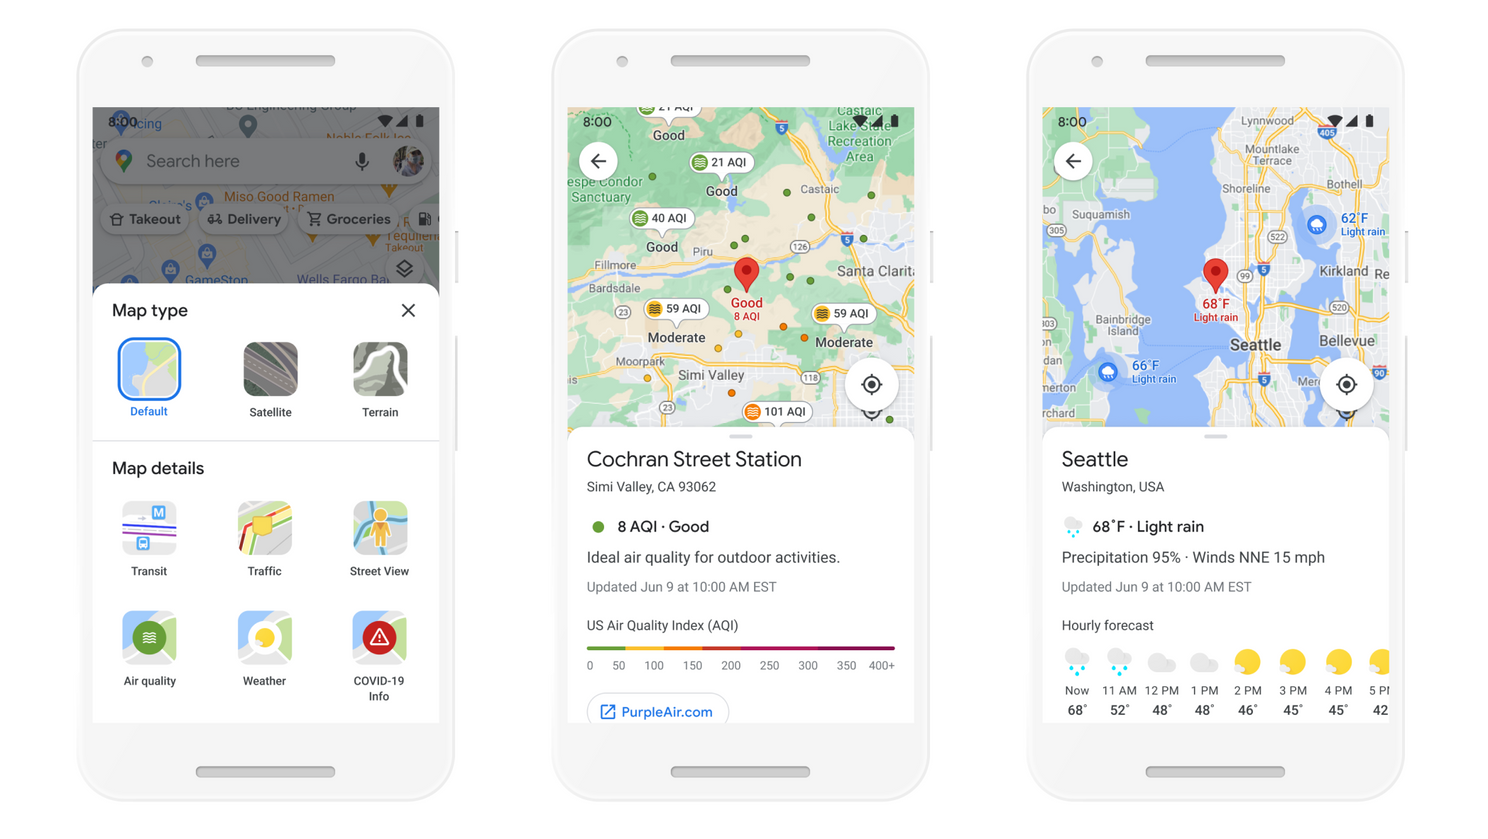 Google Maps shows 2 new layers of information about forest fires and air quality